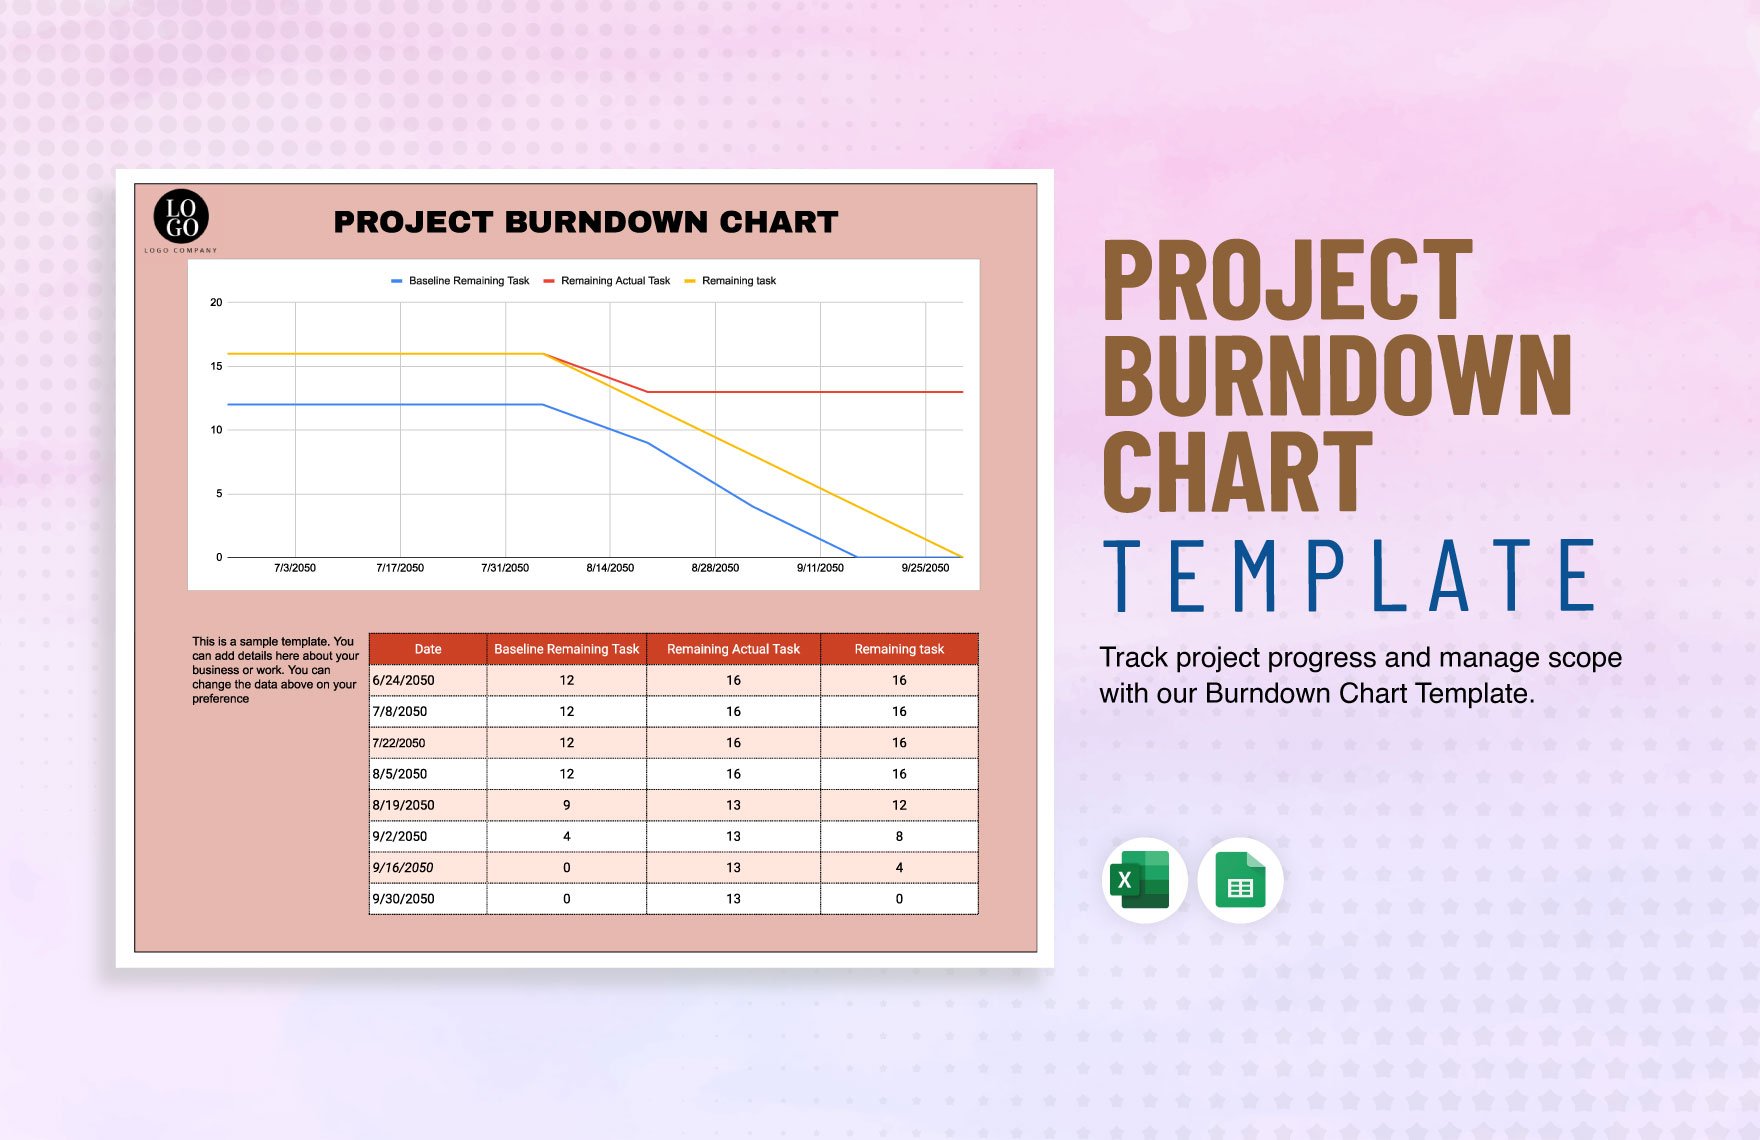 Project Burndown Chart Template in Excel, Google Sheets